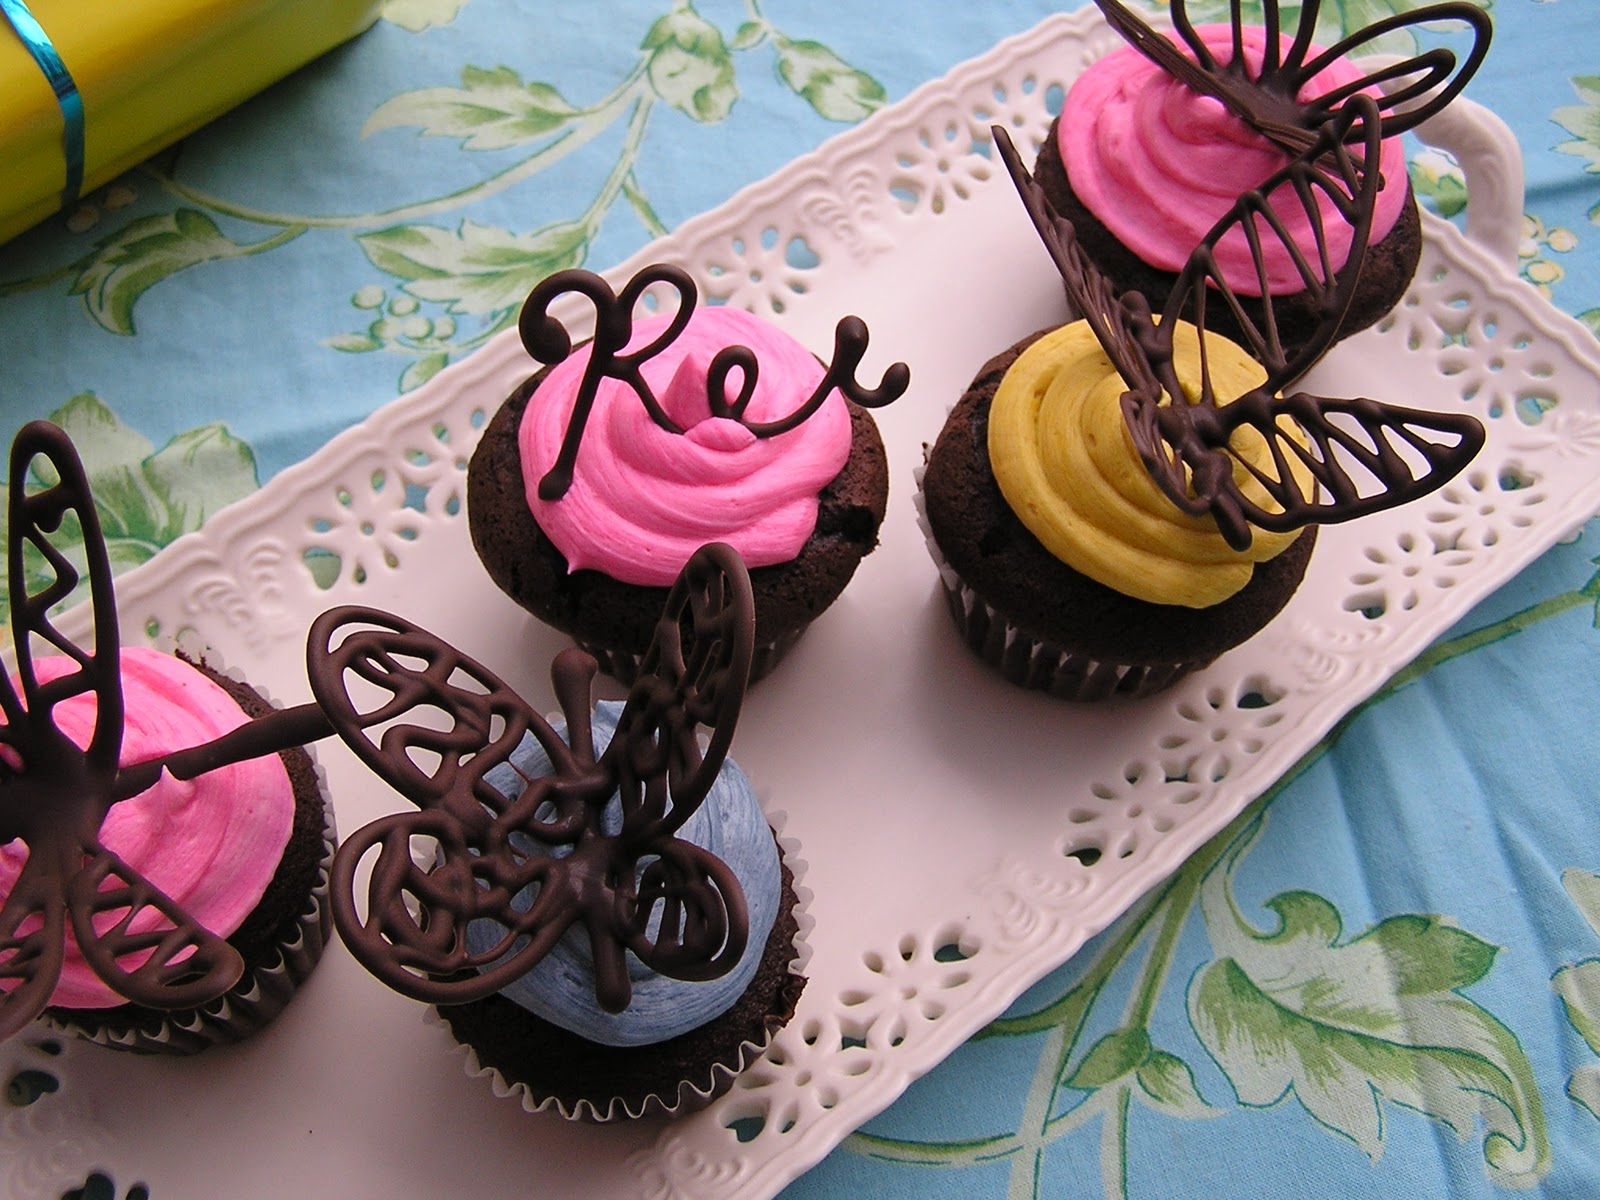 cool cupcake designs Learn to make easy, fast, and beautiful chocolate butterflies after 